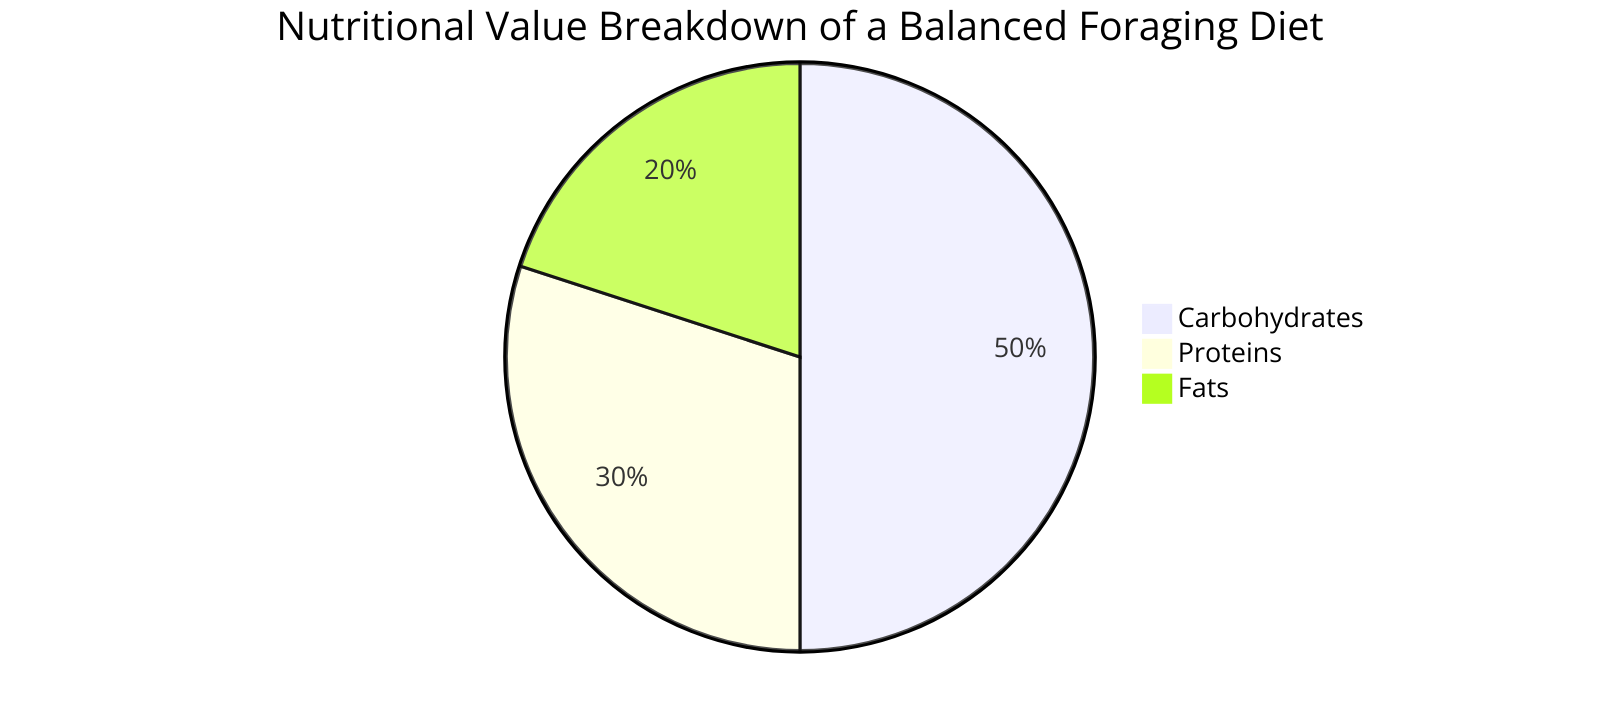 the nutritional value breakdown of a balanced foraging diet